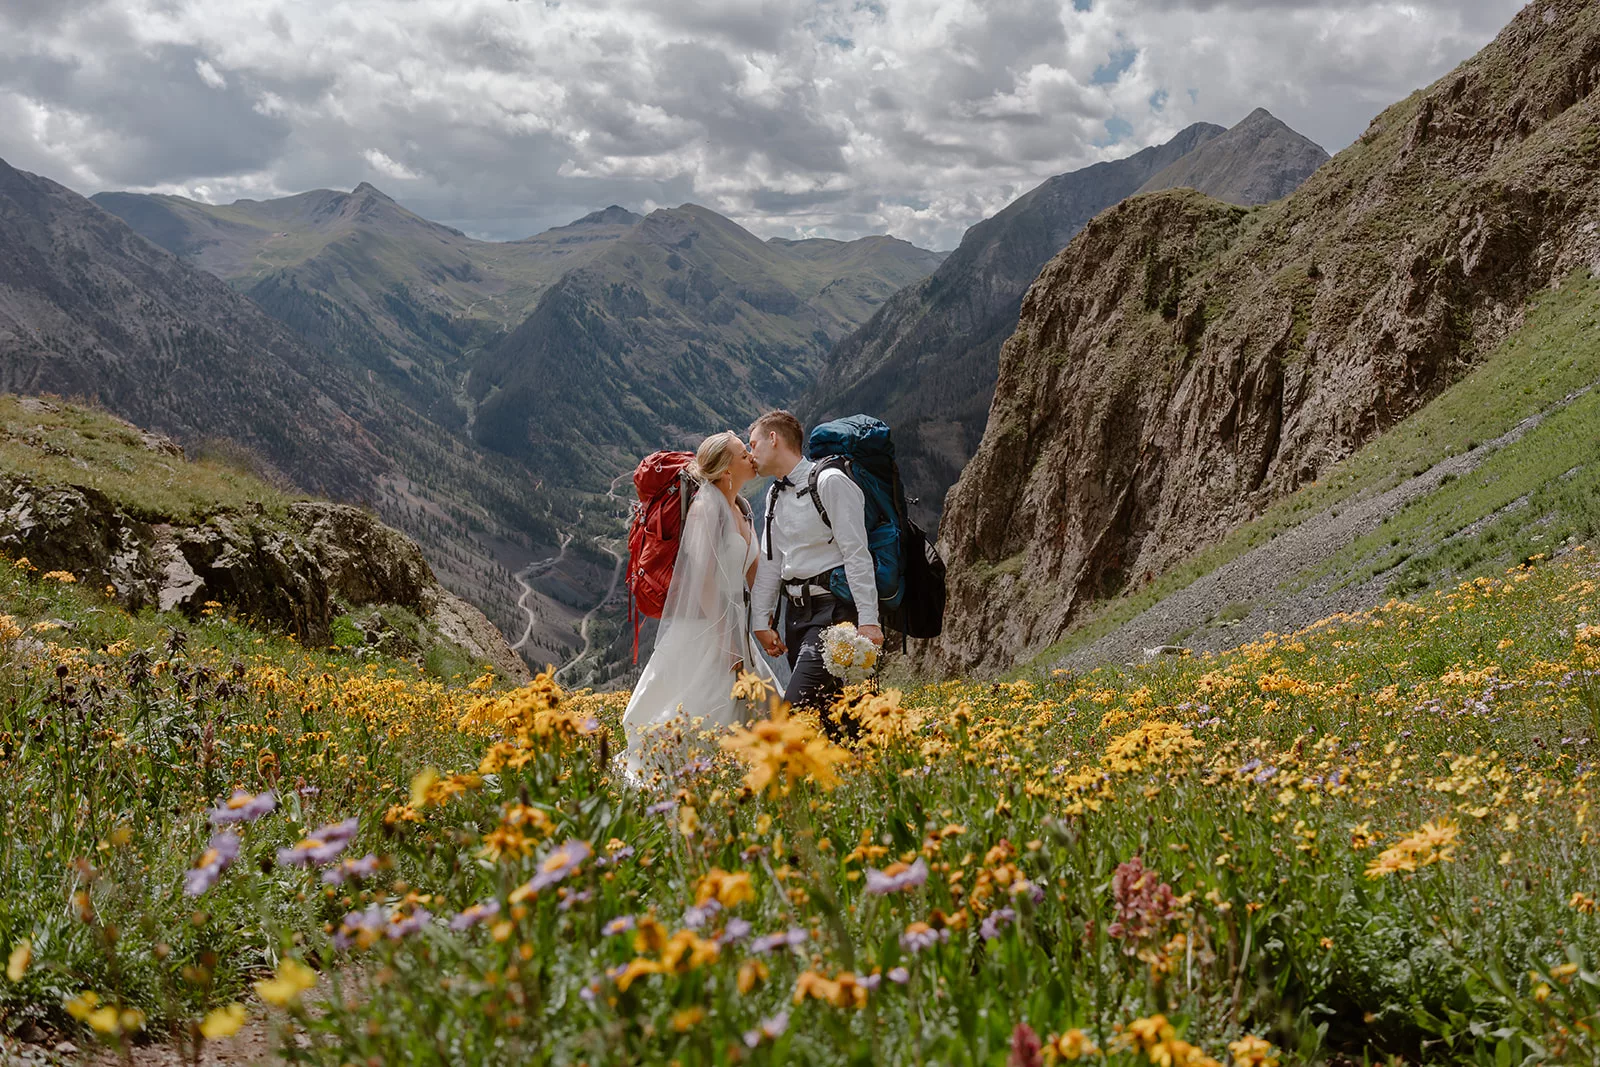 A couple poses in front of the wild yellow flowers in a mountain range during their San Juan mountain elopement.